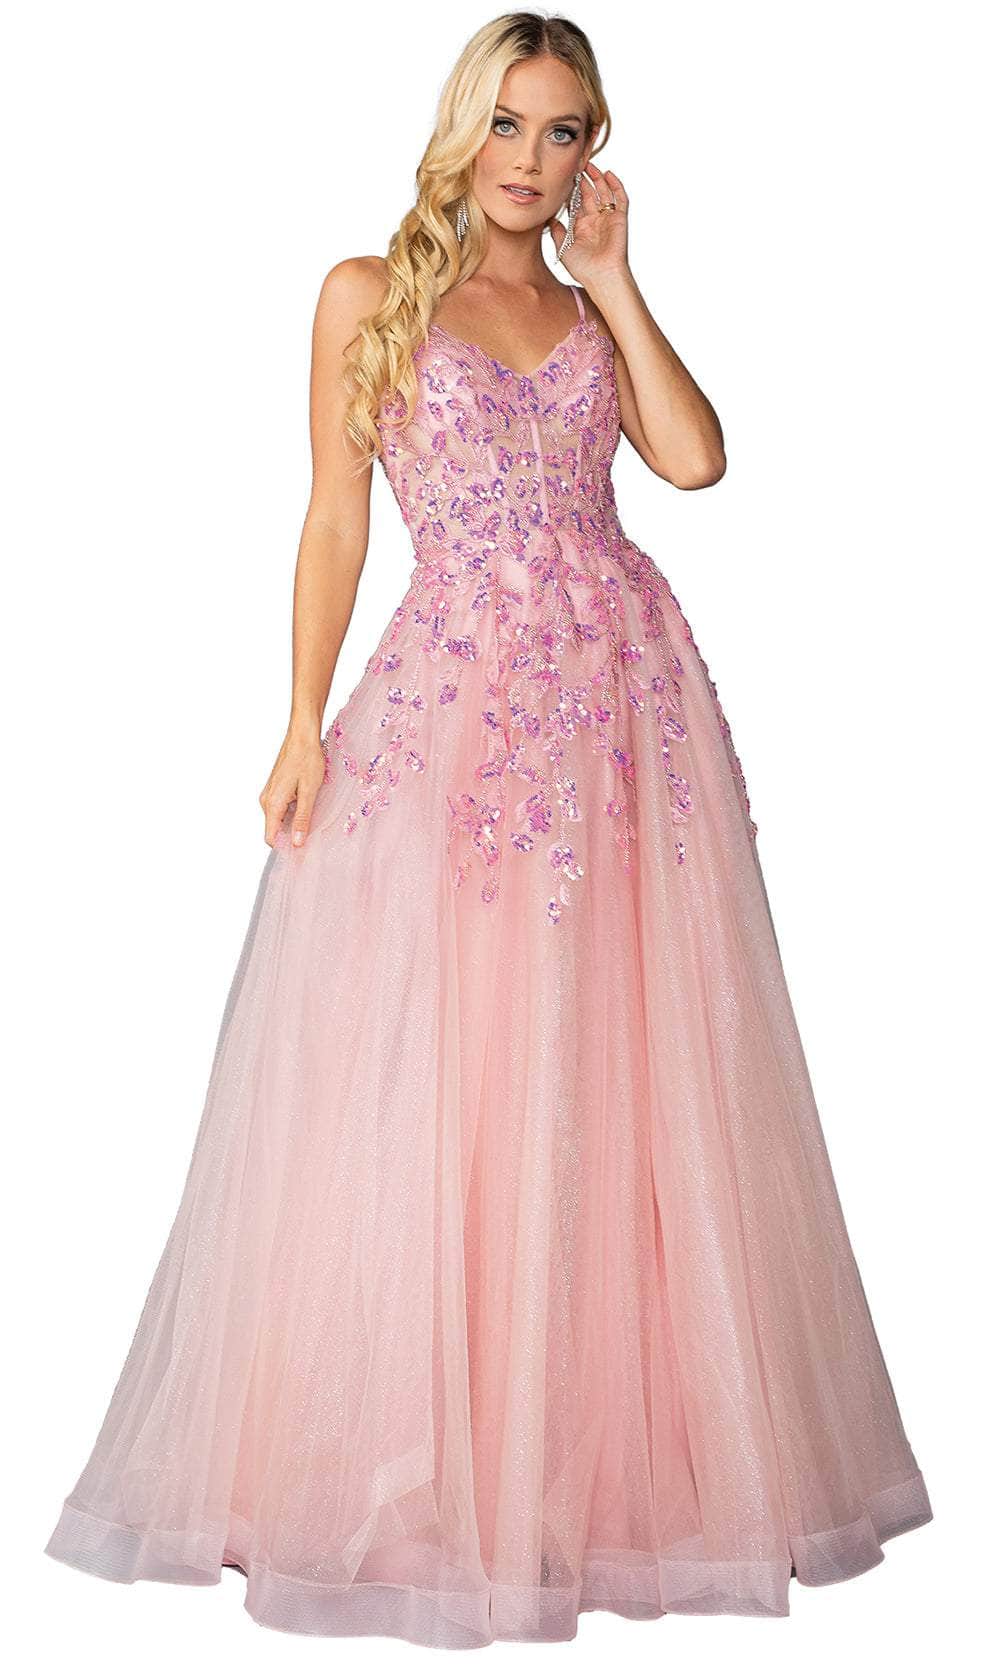 Image of Dancing Queen 4451 - Sleeveless Embellished Prom Gown